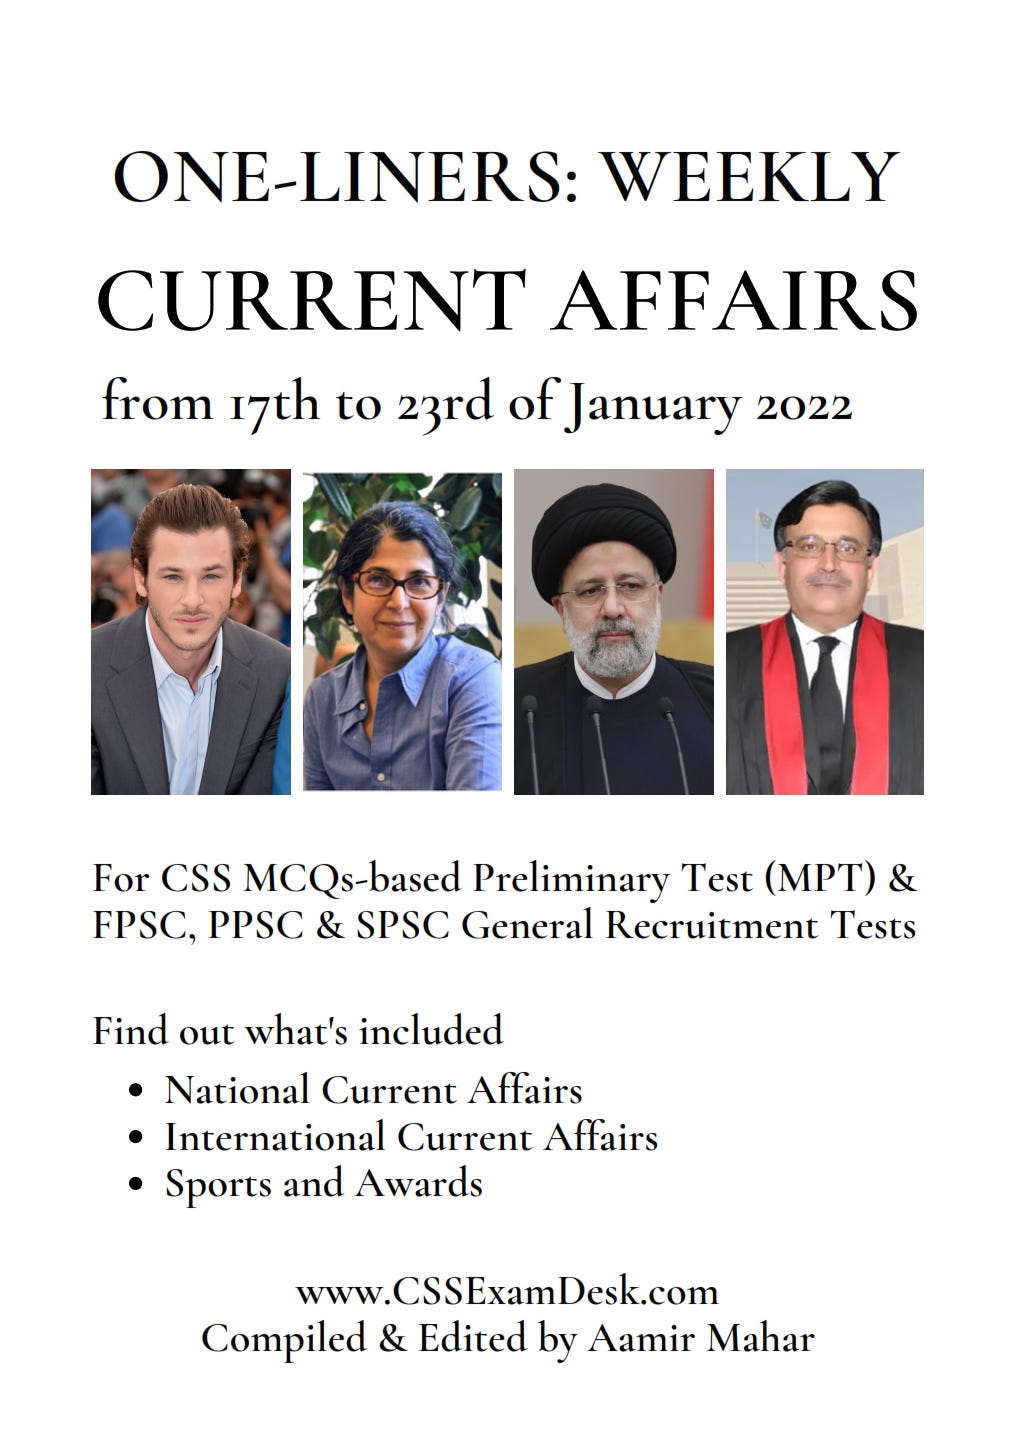 Weekly Current Affairs | 17th of January 2022 to 23rd of January 2022